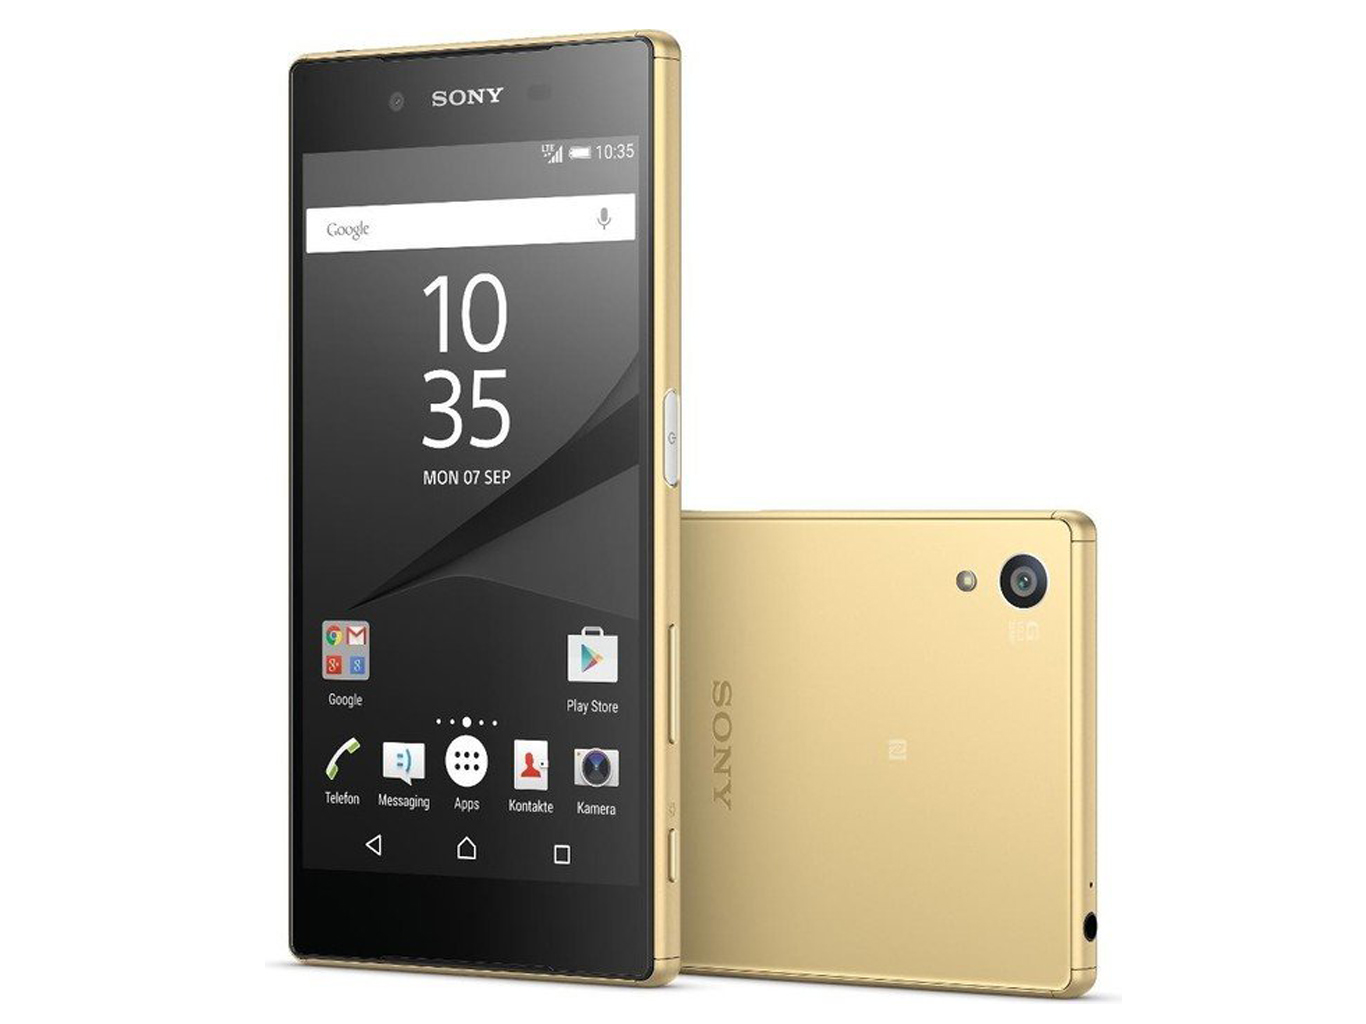 lade Overgave Overtreffen Sony Xperia Z5 Smartphone Review - NotebookCheck.net Reviews